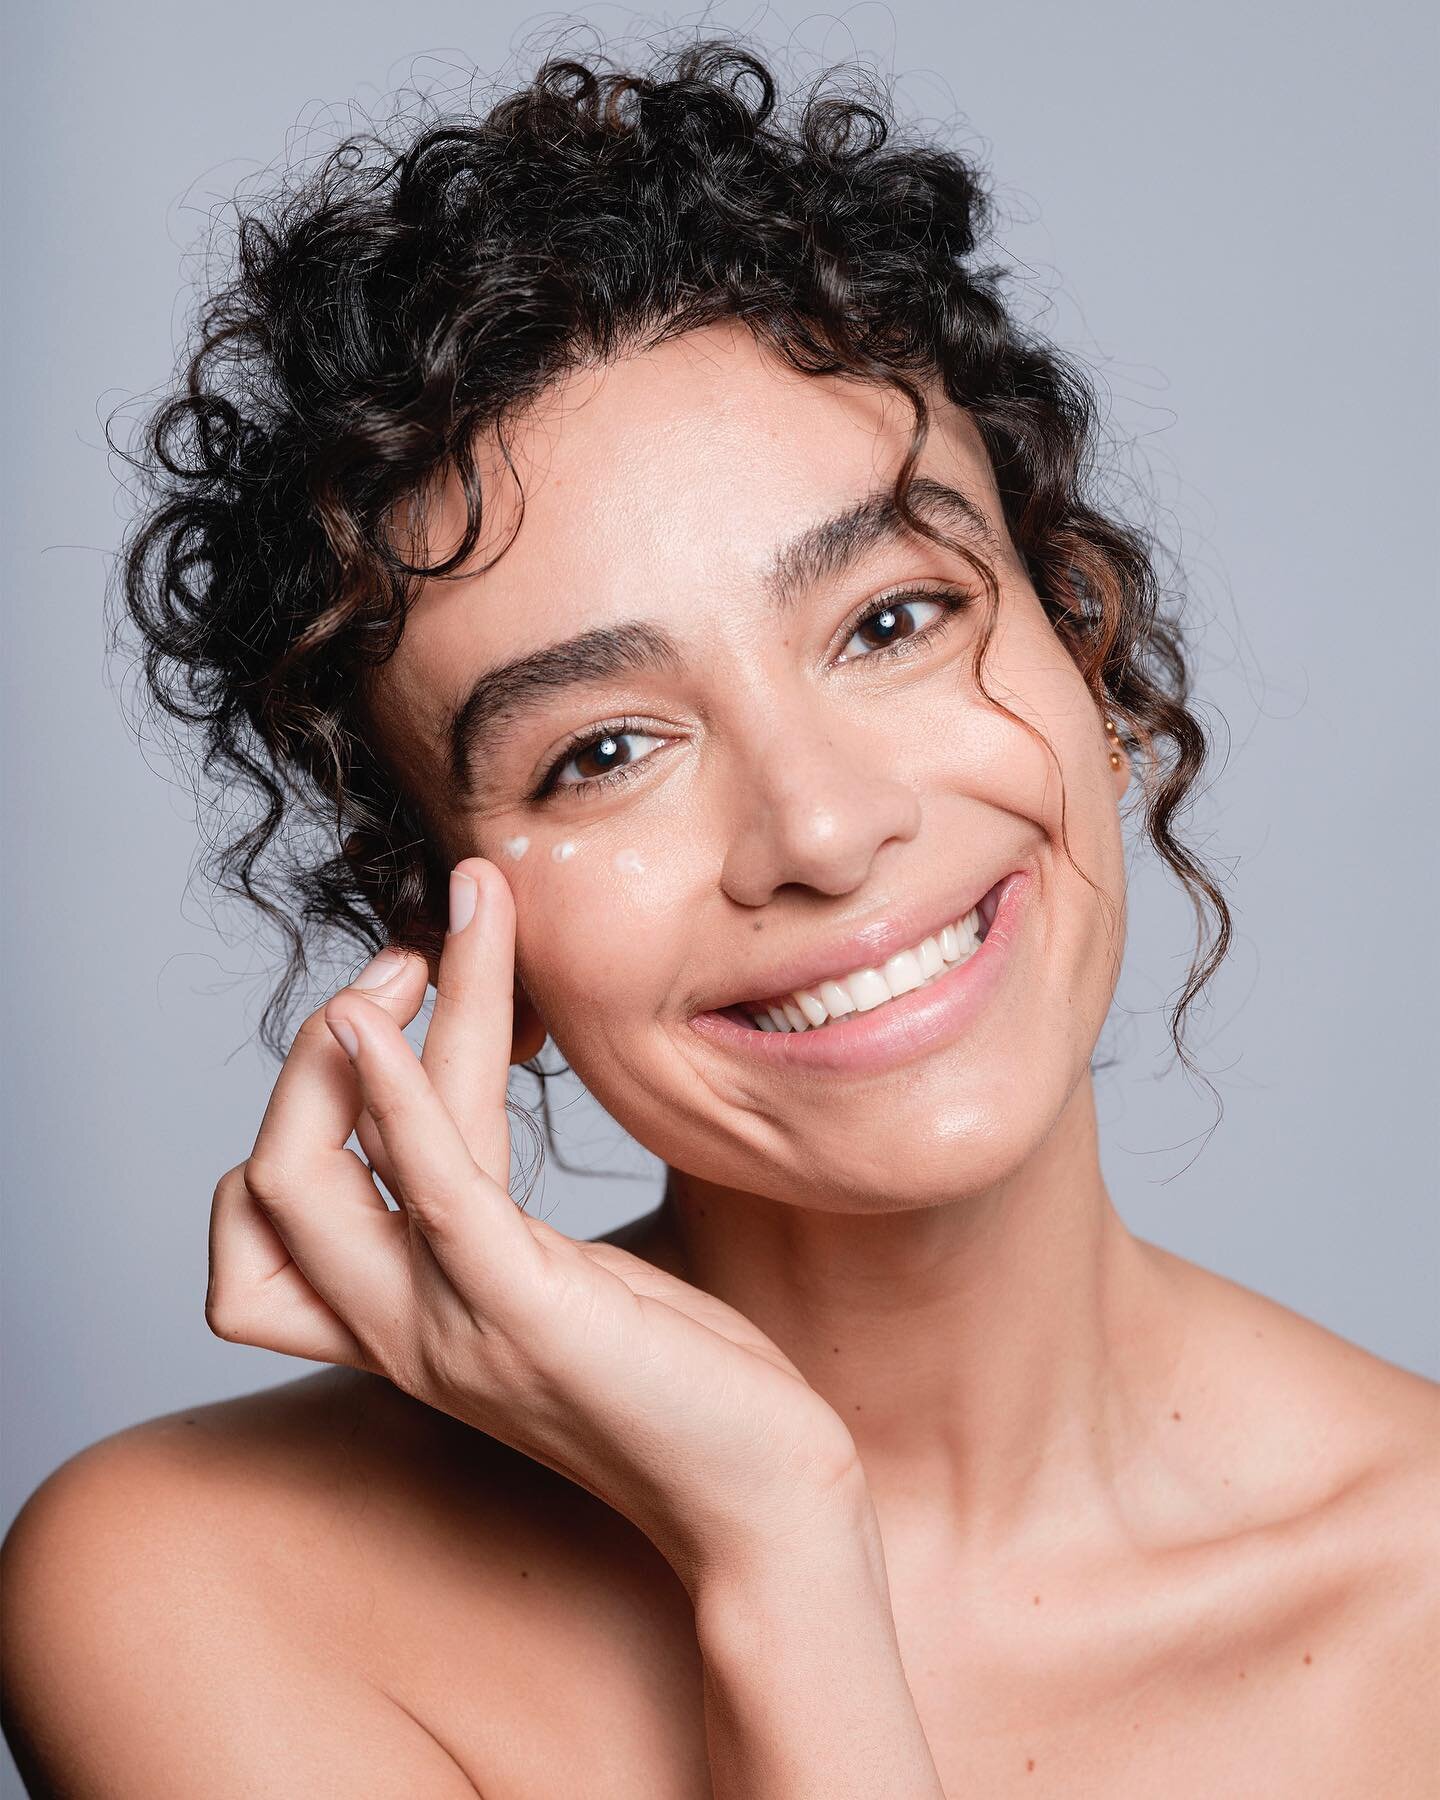 Beauty portrait of @amandachrishelofficial  for our client @oneoceanbeauty - clean, vegan, clinically proven beauty at its very best!
.
.
Production: The Factory Creative
Photo: Sean Collymore
Client: One Ocean Beauty
Producer: Lia Temple
Make Up: Am